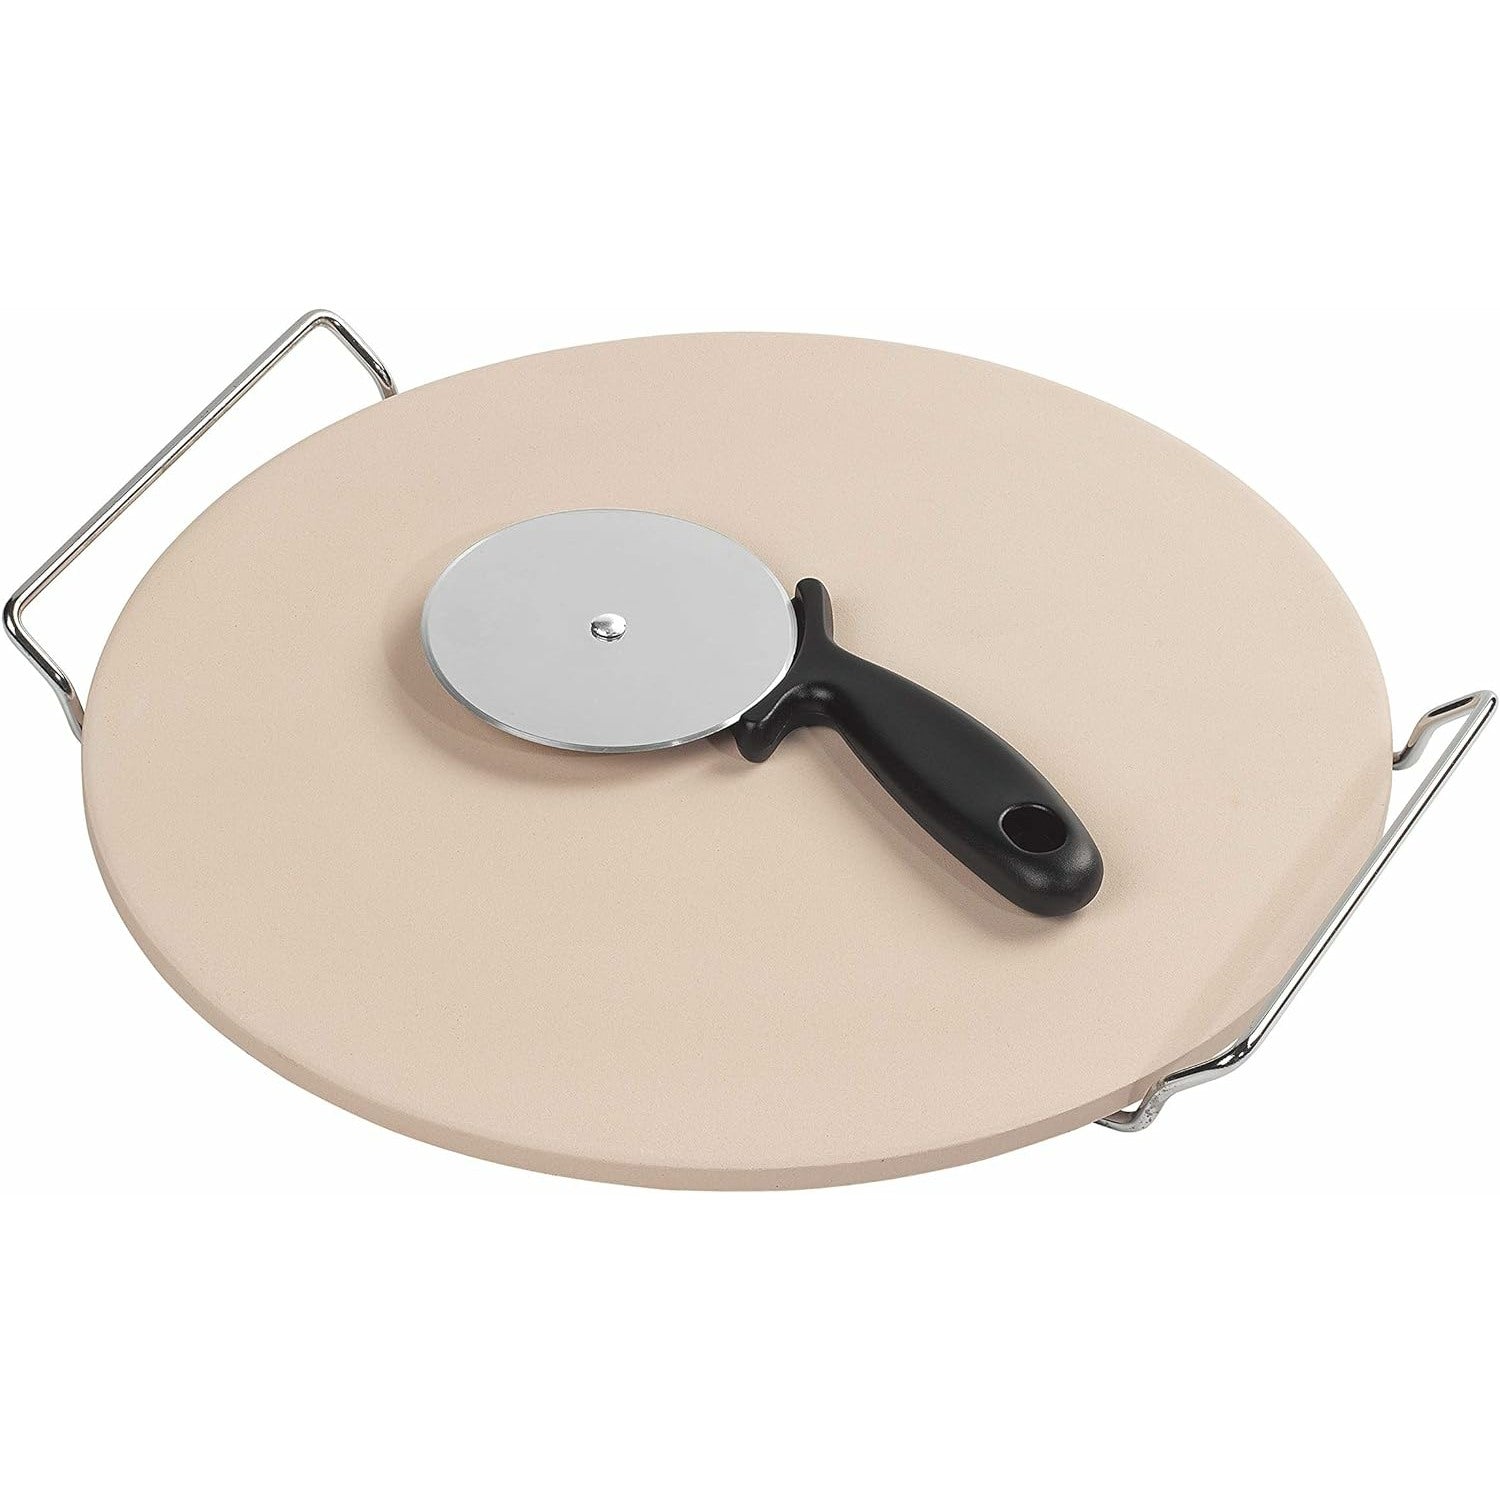 Tala 32cm Pizza Stone with Pizza Cutter 10A17150